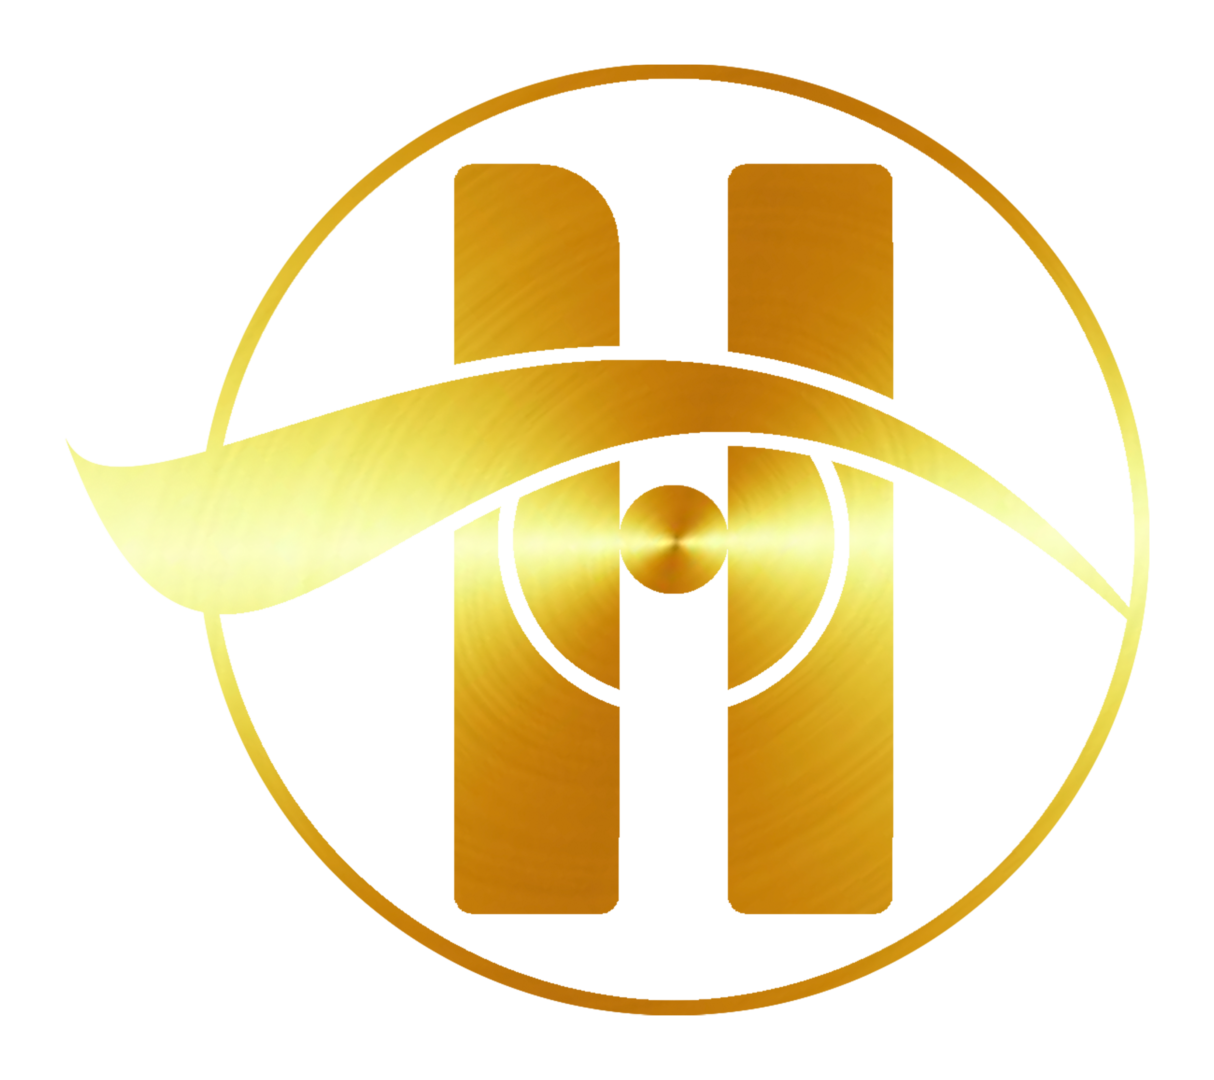 A gold colored logo of the h company.